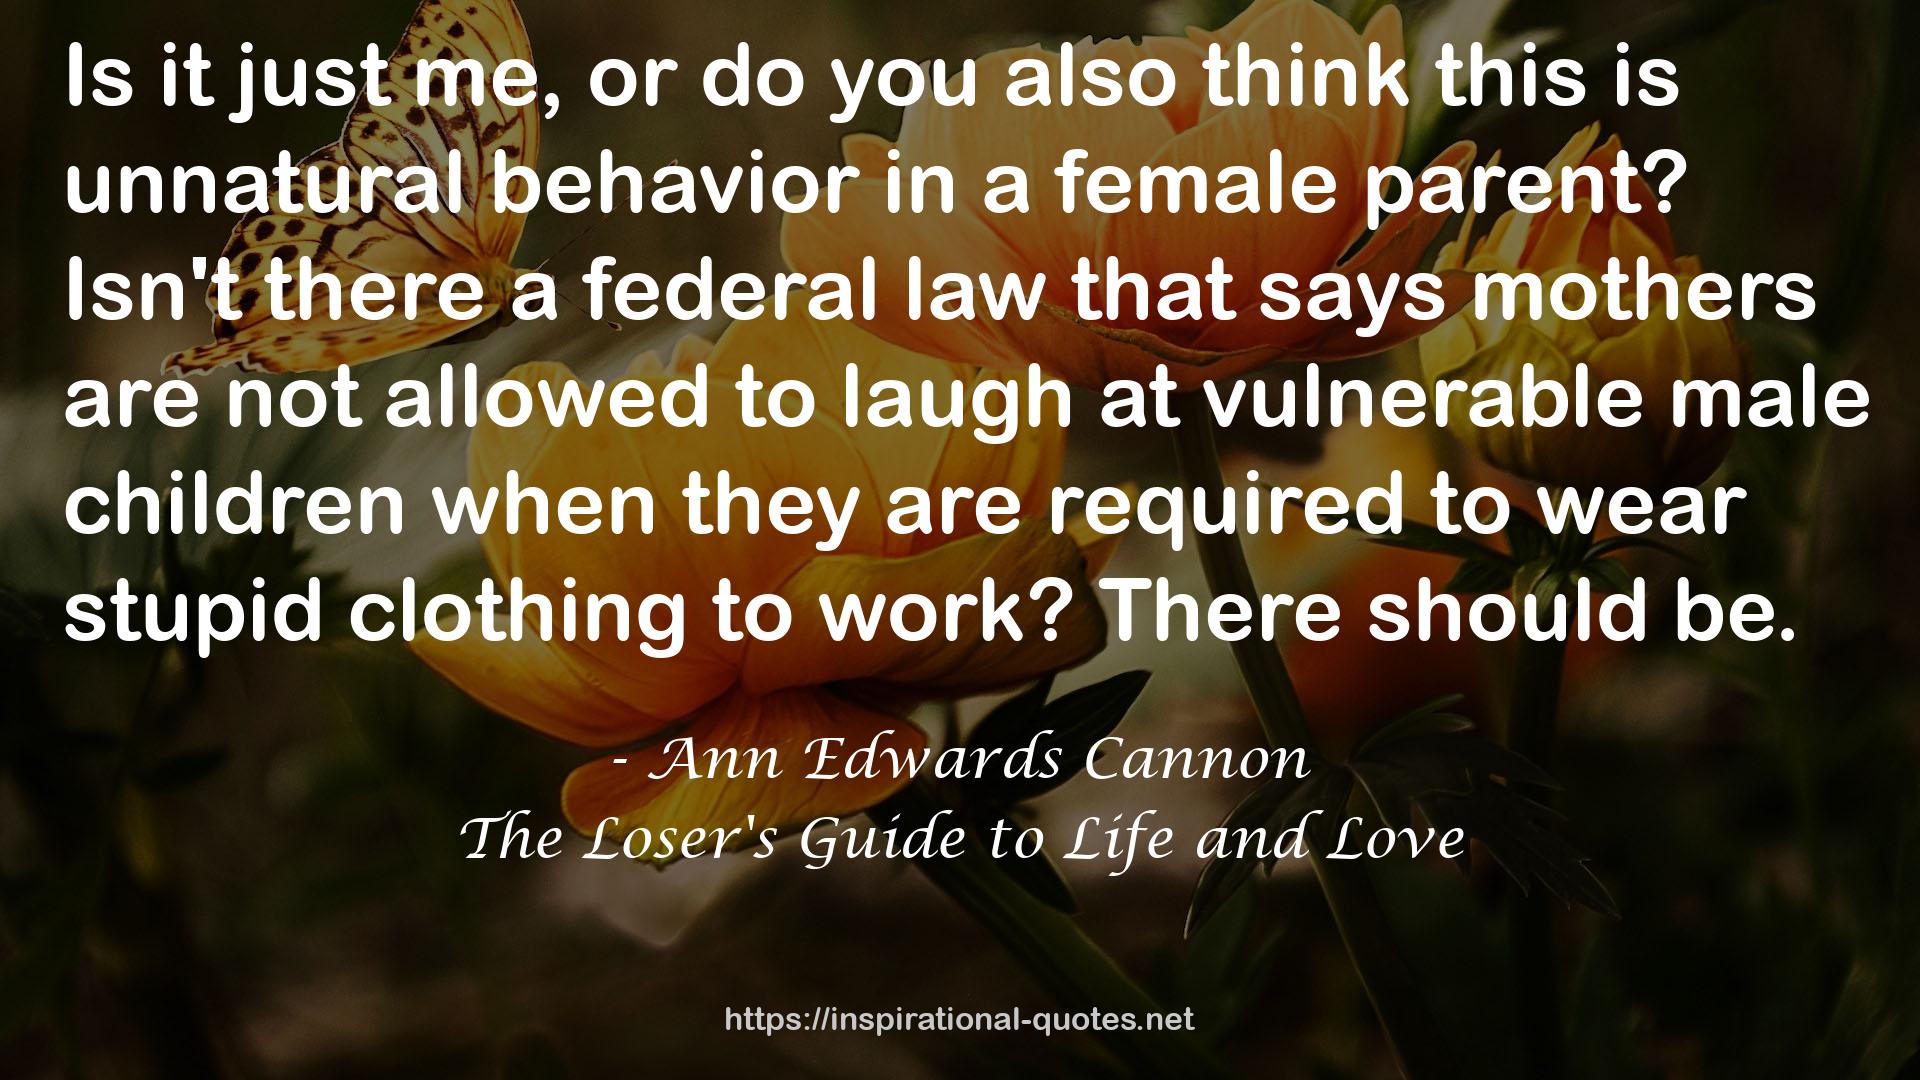 The Loser's Guide to Life and Love QUOTES